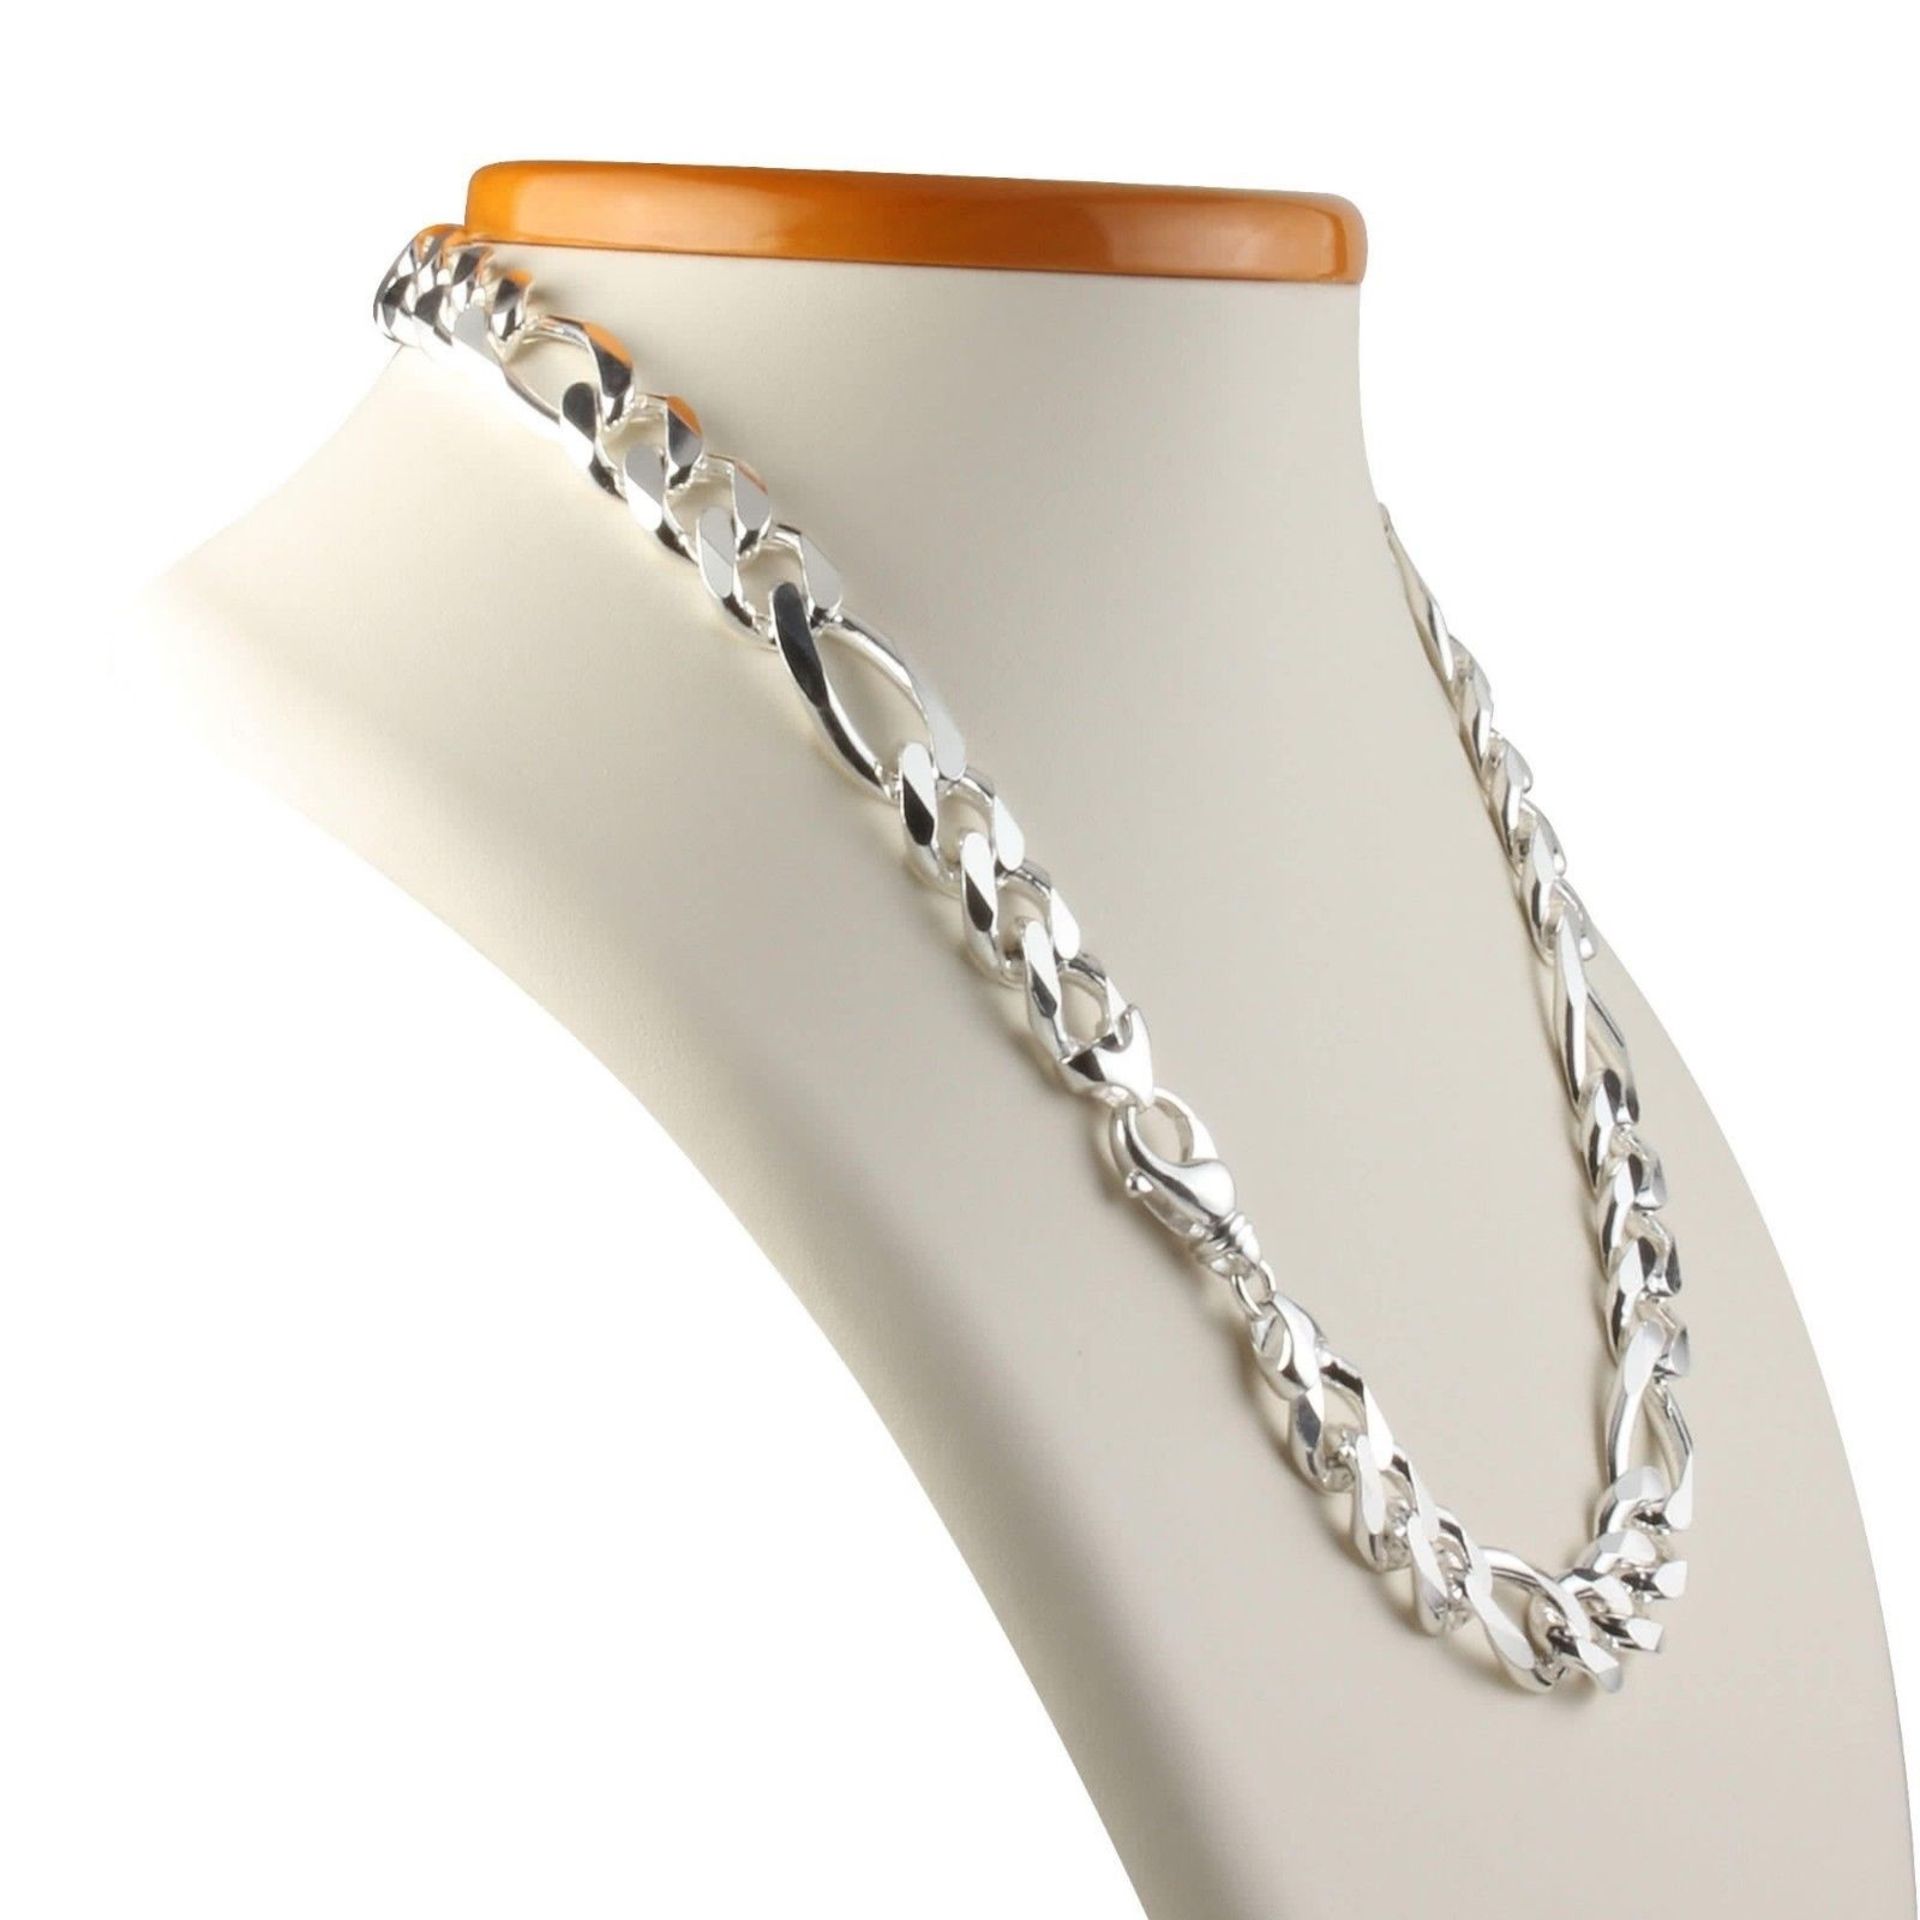 Men's Figaro Hip Hop Chain Necklace Solid 925 Sterling Silver 8mm 65.5 GR 24 inch - 60cm - Image 2 of 2